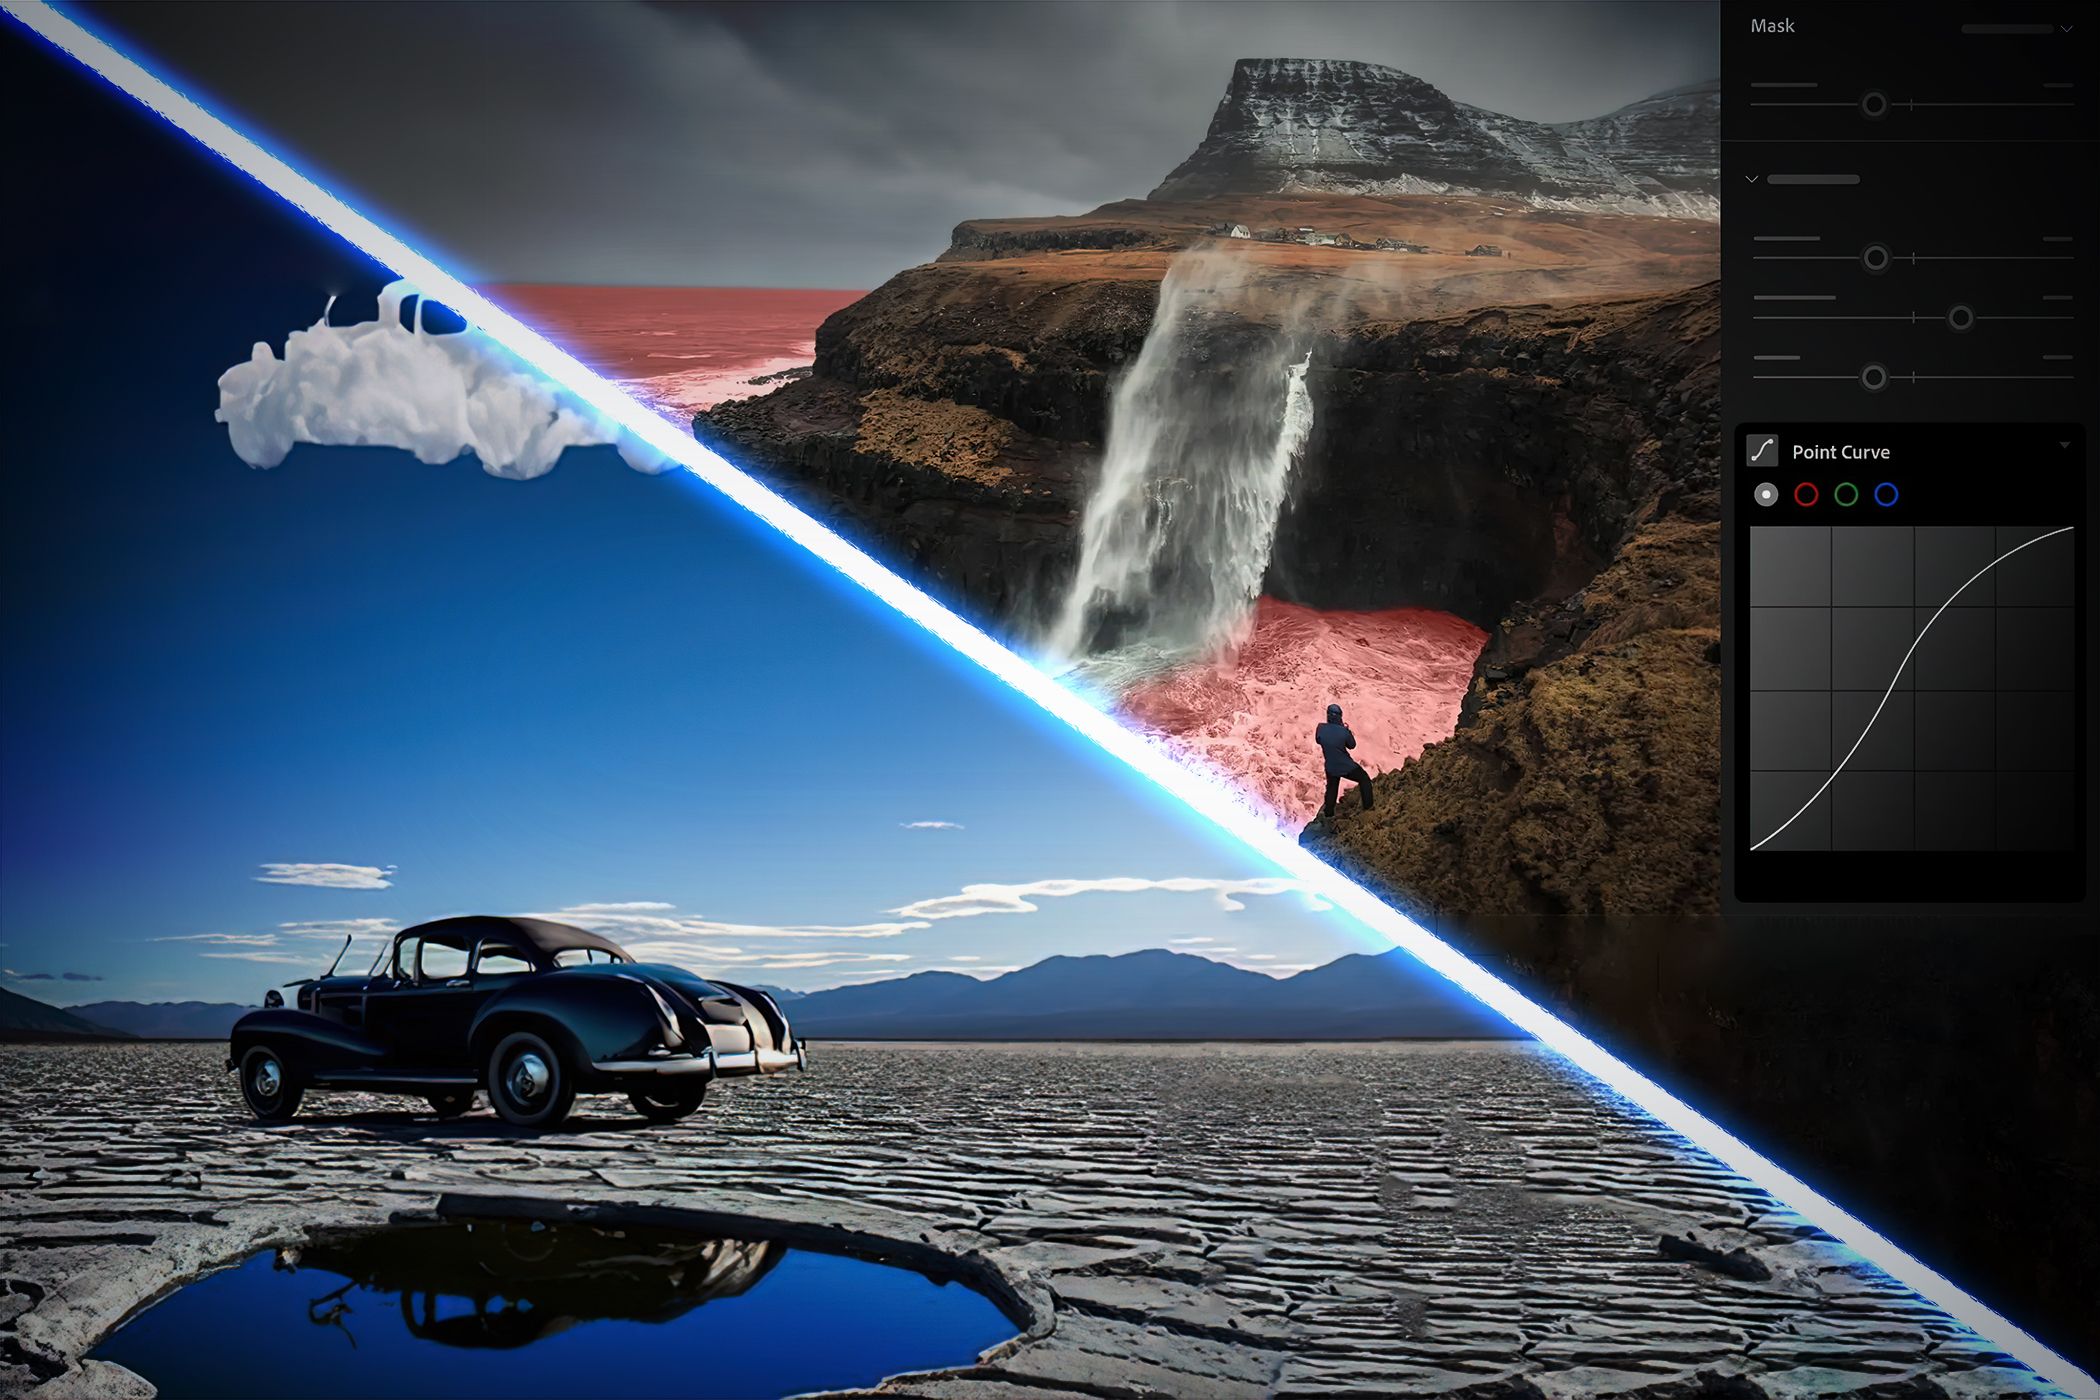 Split image showing a car on dry land and a man by a waterfall, illustrating photo editing transformation effects.